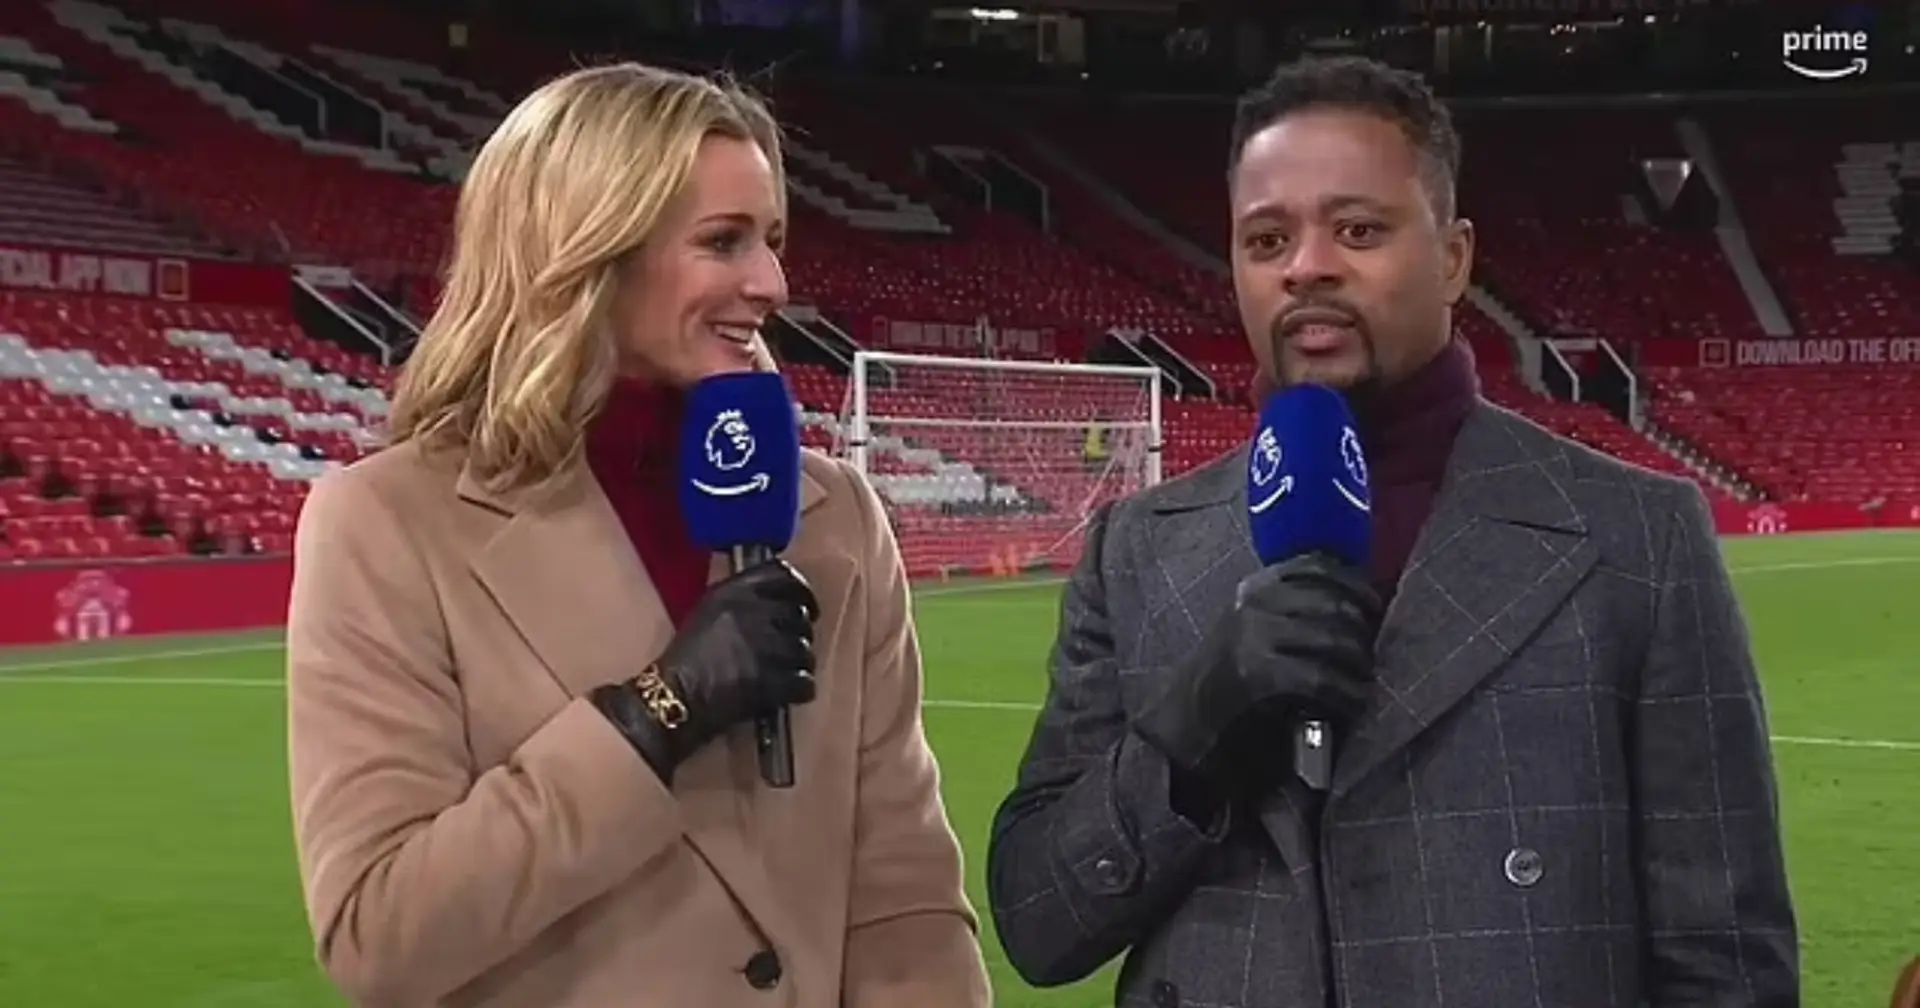 'We talk a lot about Man City and Arsenal': Patrice Evra warns Gunners over Liverpool's title ambitions